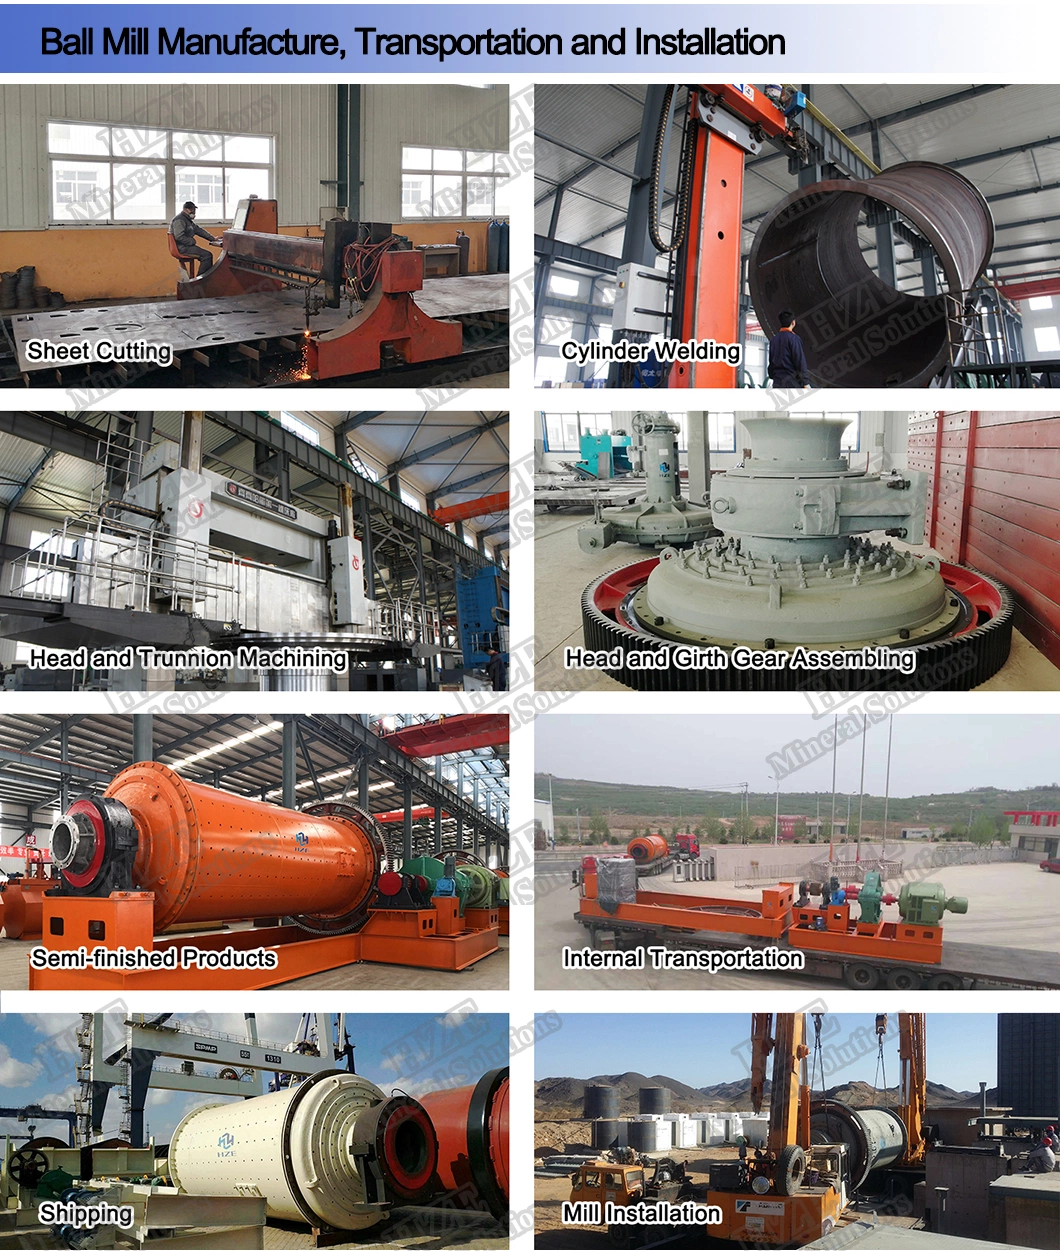 Gold Mining Machine Energy Saving Grate Ball Mill of Mineral Processing Plant